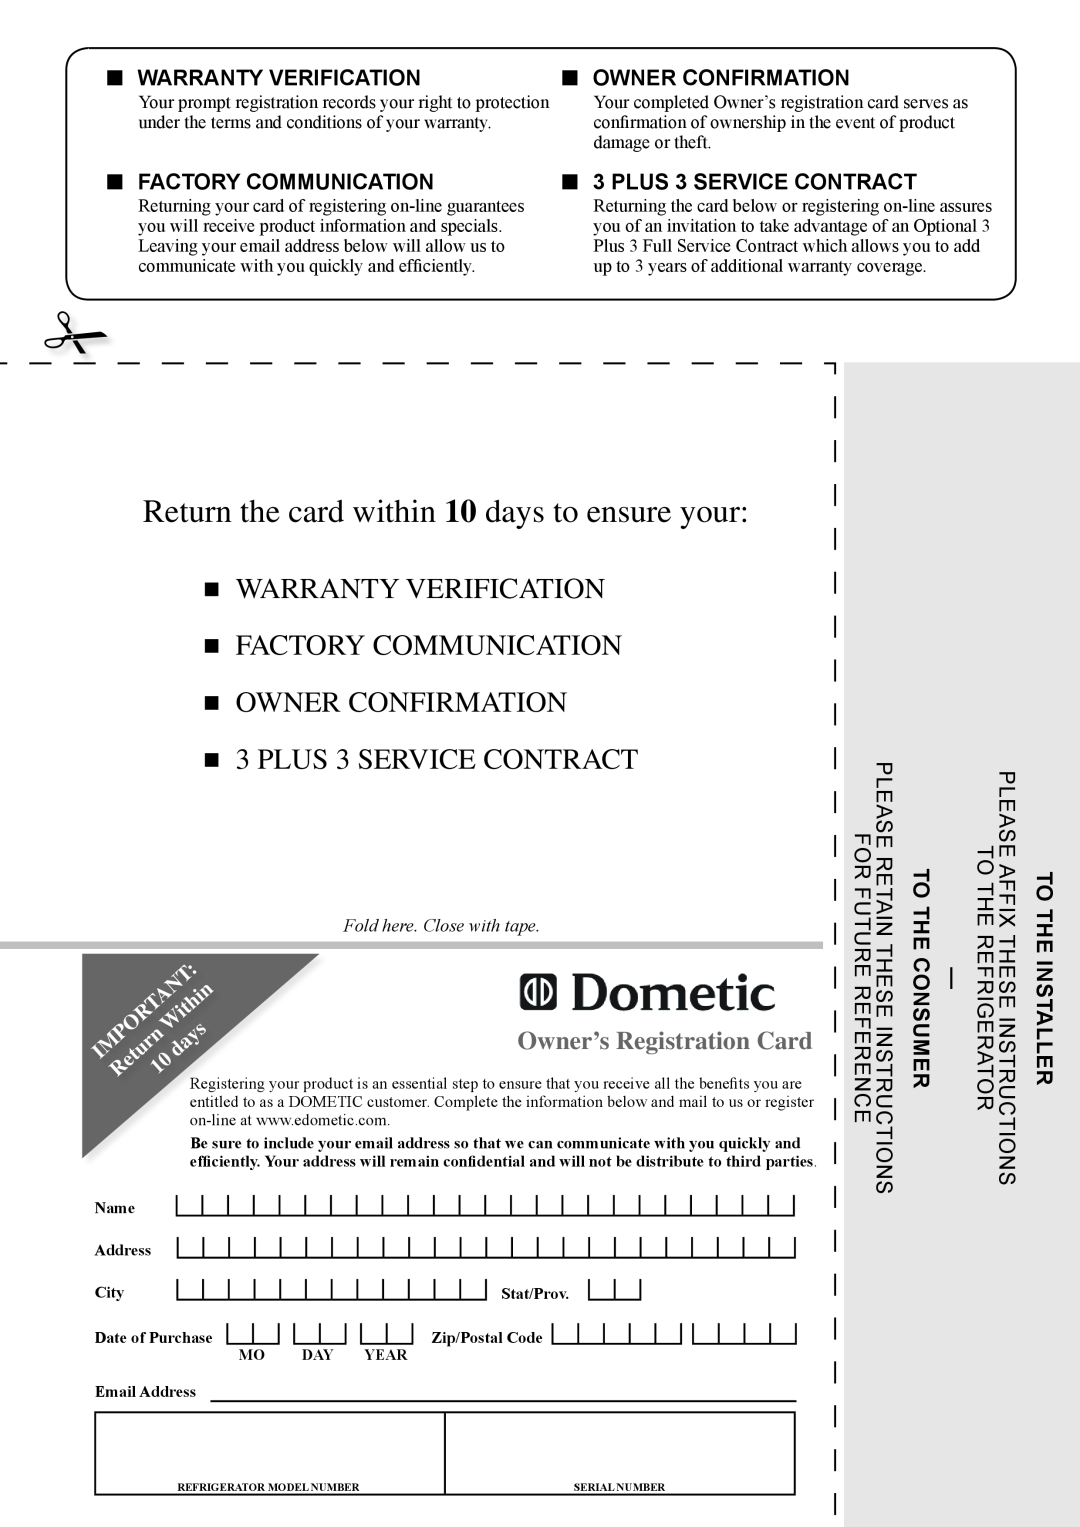 Dometic DM2862 manual Return the card within 10 days to ensure your, plus 3 service contract, Owner’s Registration Card 